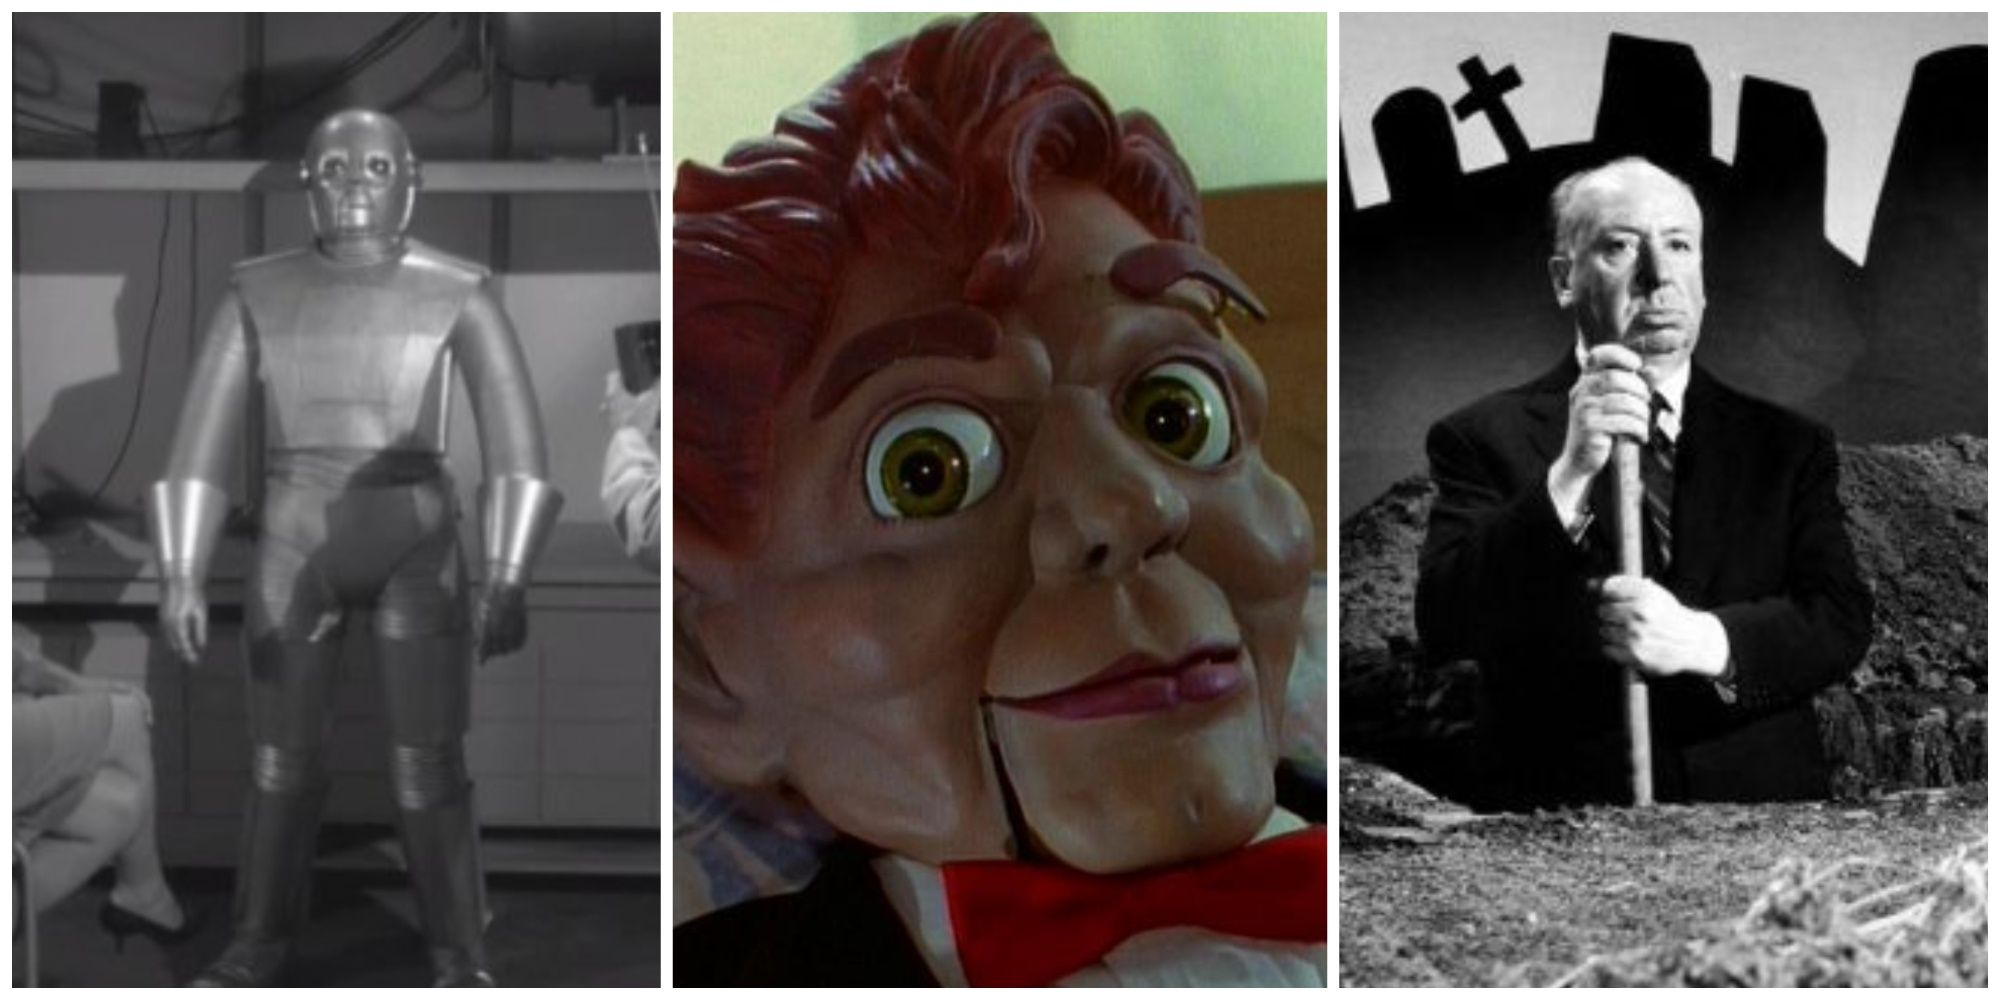 Split image showing images from The Outer Limits, Goosebumps, and Alfred Hitchcock Presents.